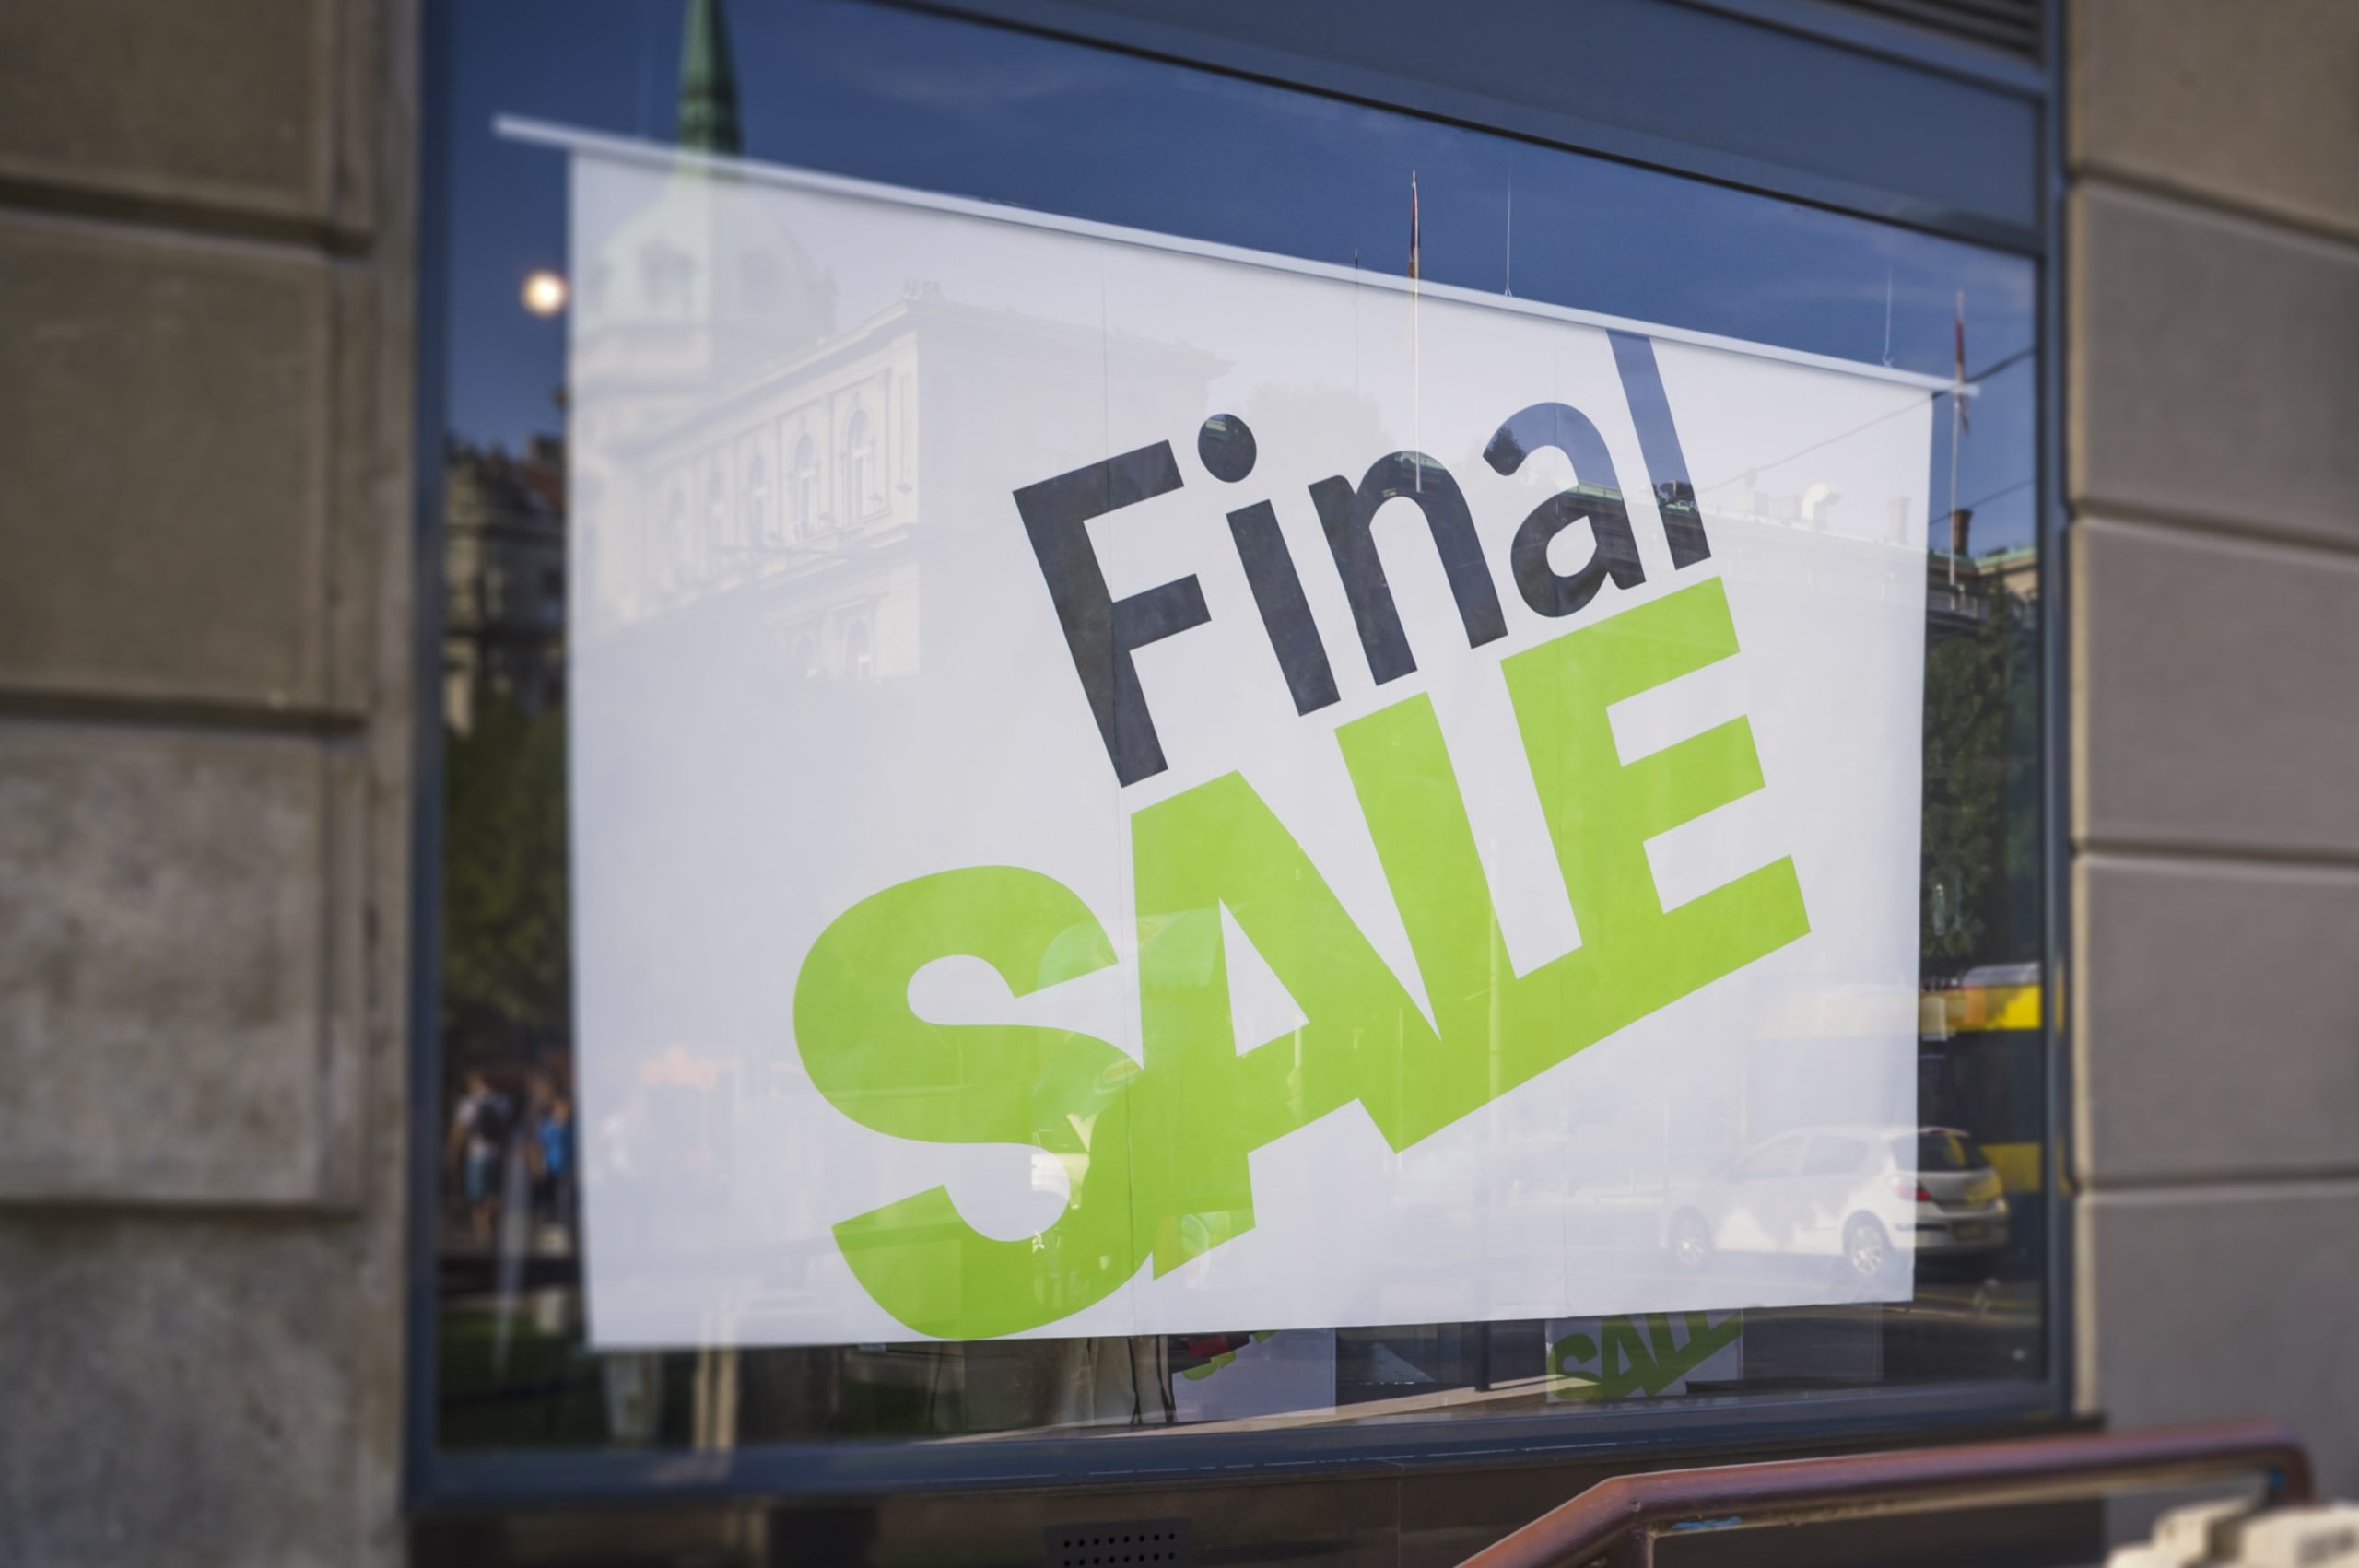 Retail Image Of A Final Sale Sign In A Clothing Store Window (With Shallow DoF)